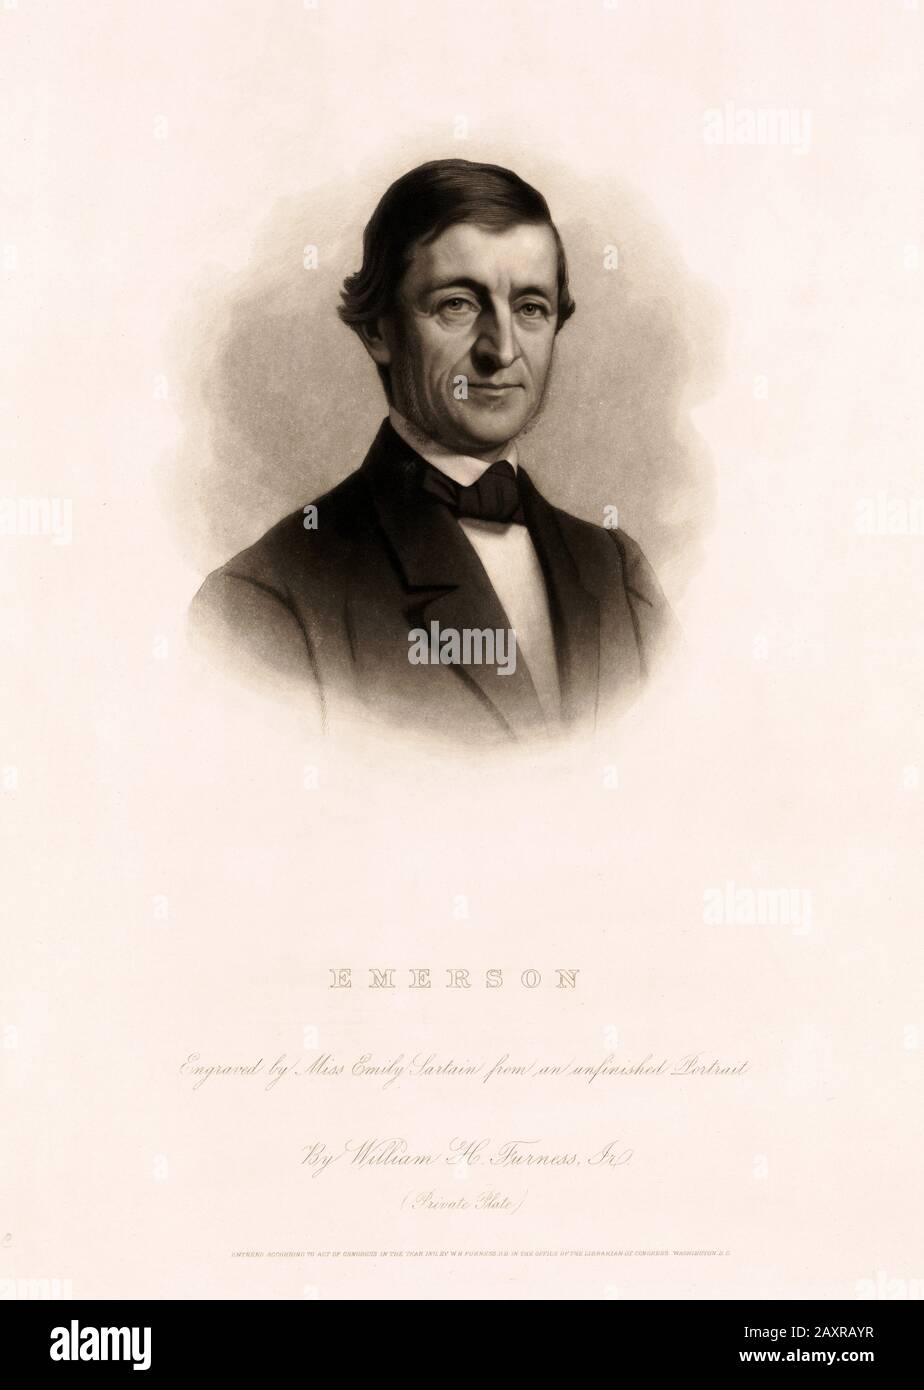 1871, USA : Portrait of american celebrated philosopher and poet RALPH WALDO EMERSON ( 1803 - 1882 ) . Portrait engraved by Emily Sartain ( 1841 - 1927 ) from an unfinished portrait by William Henry Furness  Jr. ( 1827- 1867 ).- POETA - POESIA - FILOSOFO - FILOSOFIA - PHILOSOPHY - POETRY - LETTERATO - SCRITTORE - LETTERATURA - Literature - PORTRAIT - RITRATTO - engraving - incisione - illustrazione - illustration ---  Archivio GBB Stock Photo